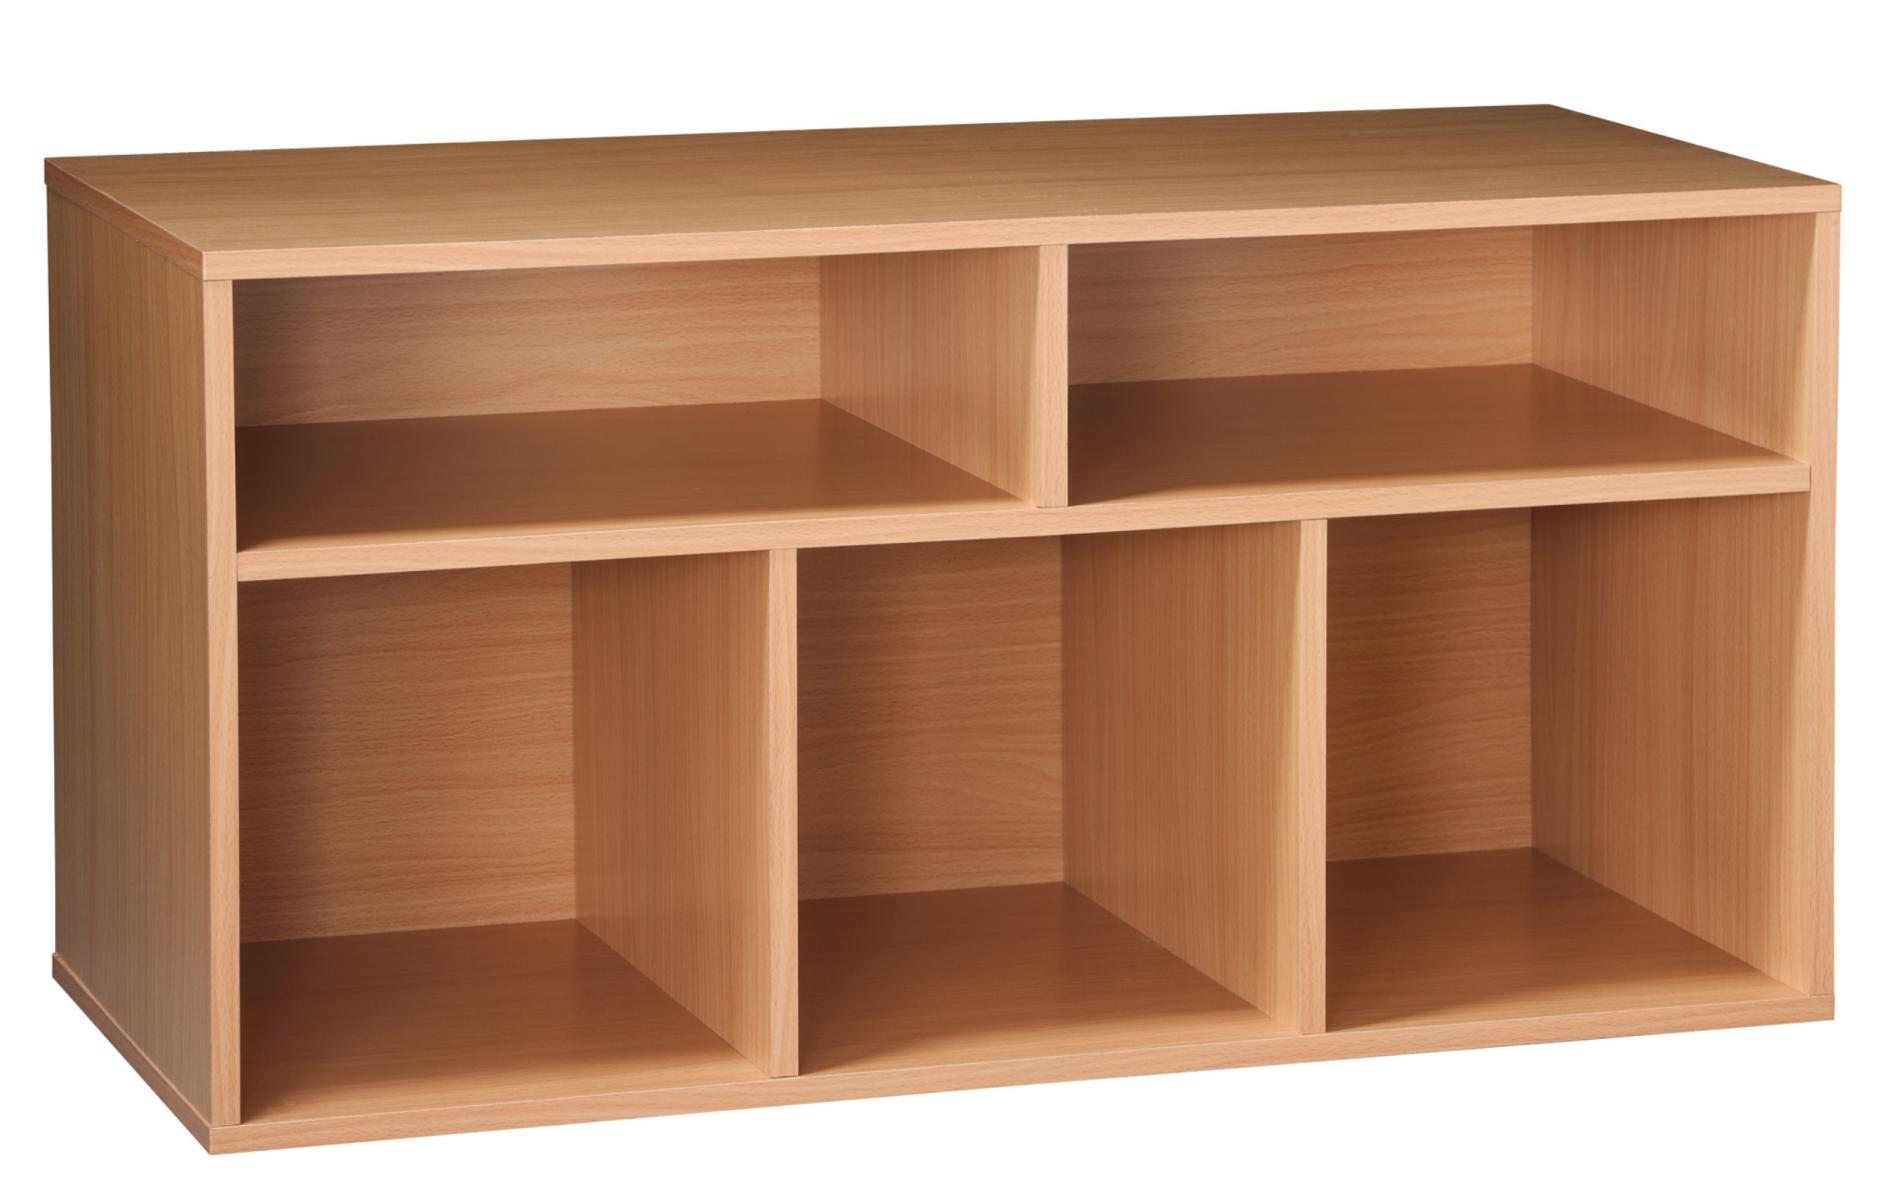 Essential Home 5 Cube Storage Unit Marked Down to $18 + Free Pickup!